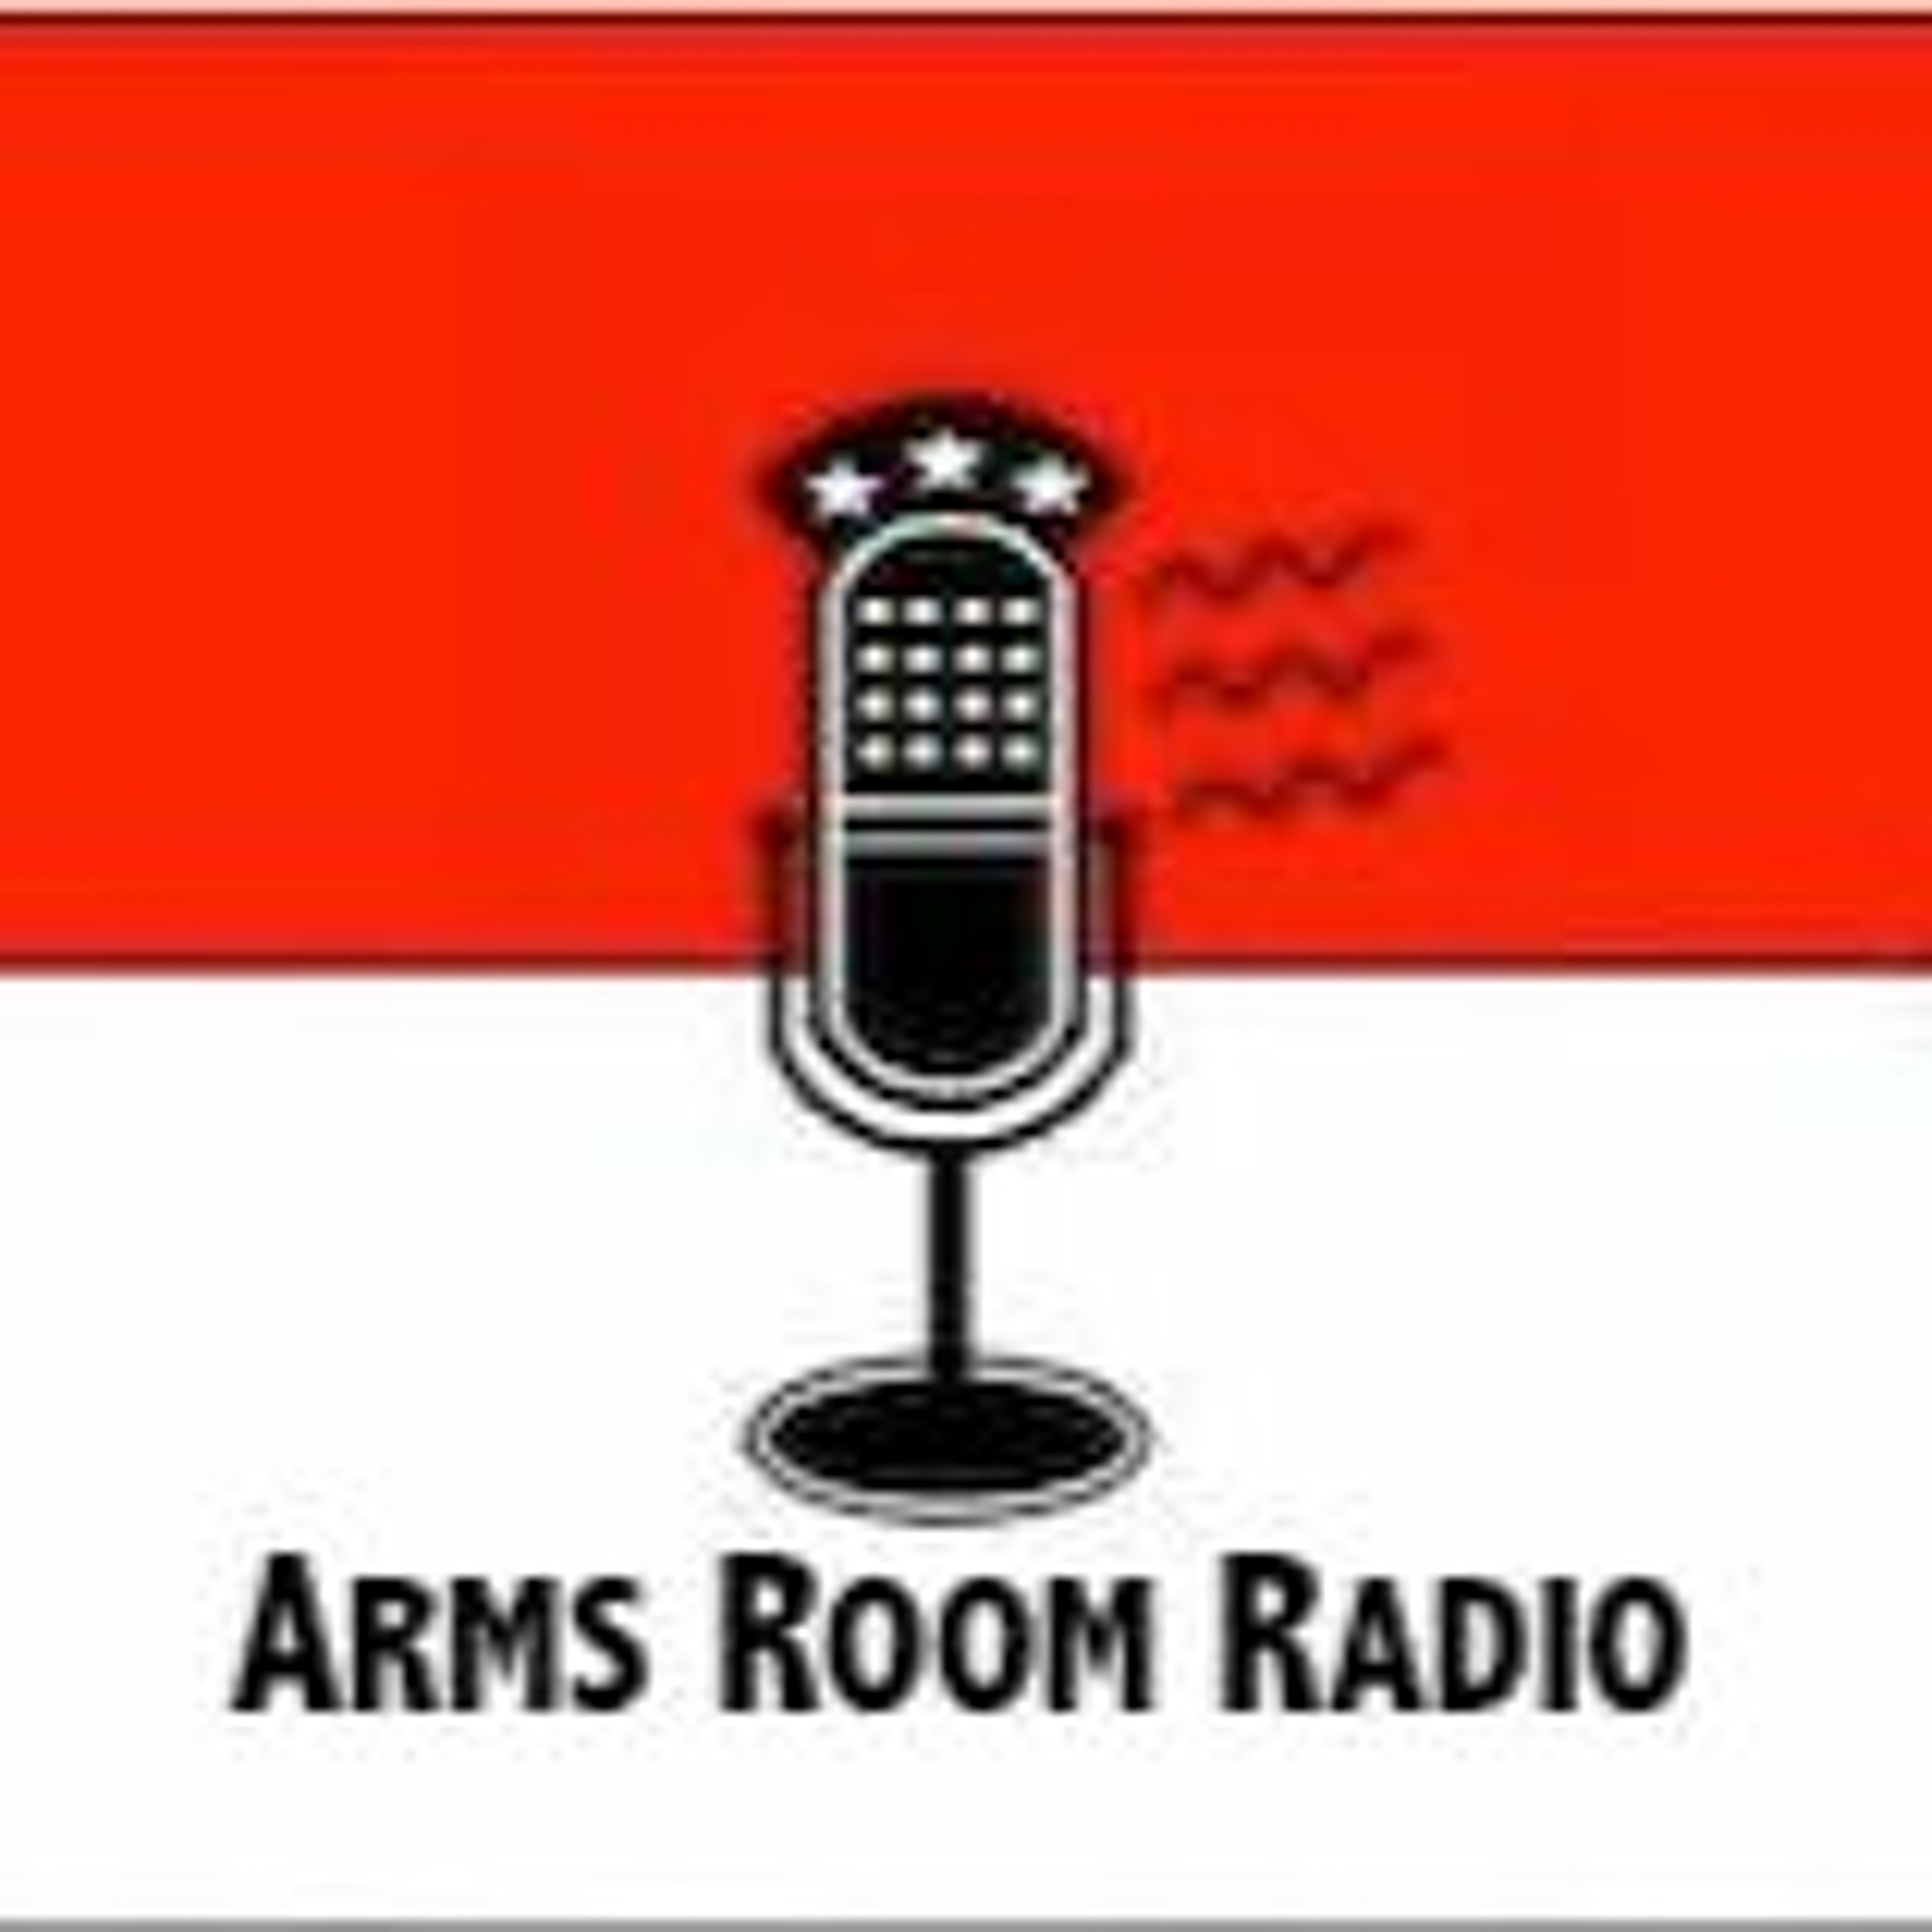 ArmsRoomRadio 09.09.23 Rare Breed Triggers and Sept 11